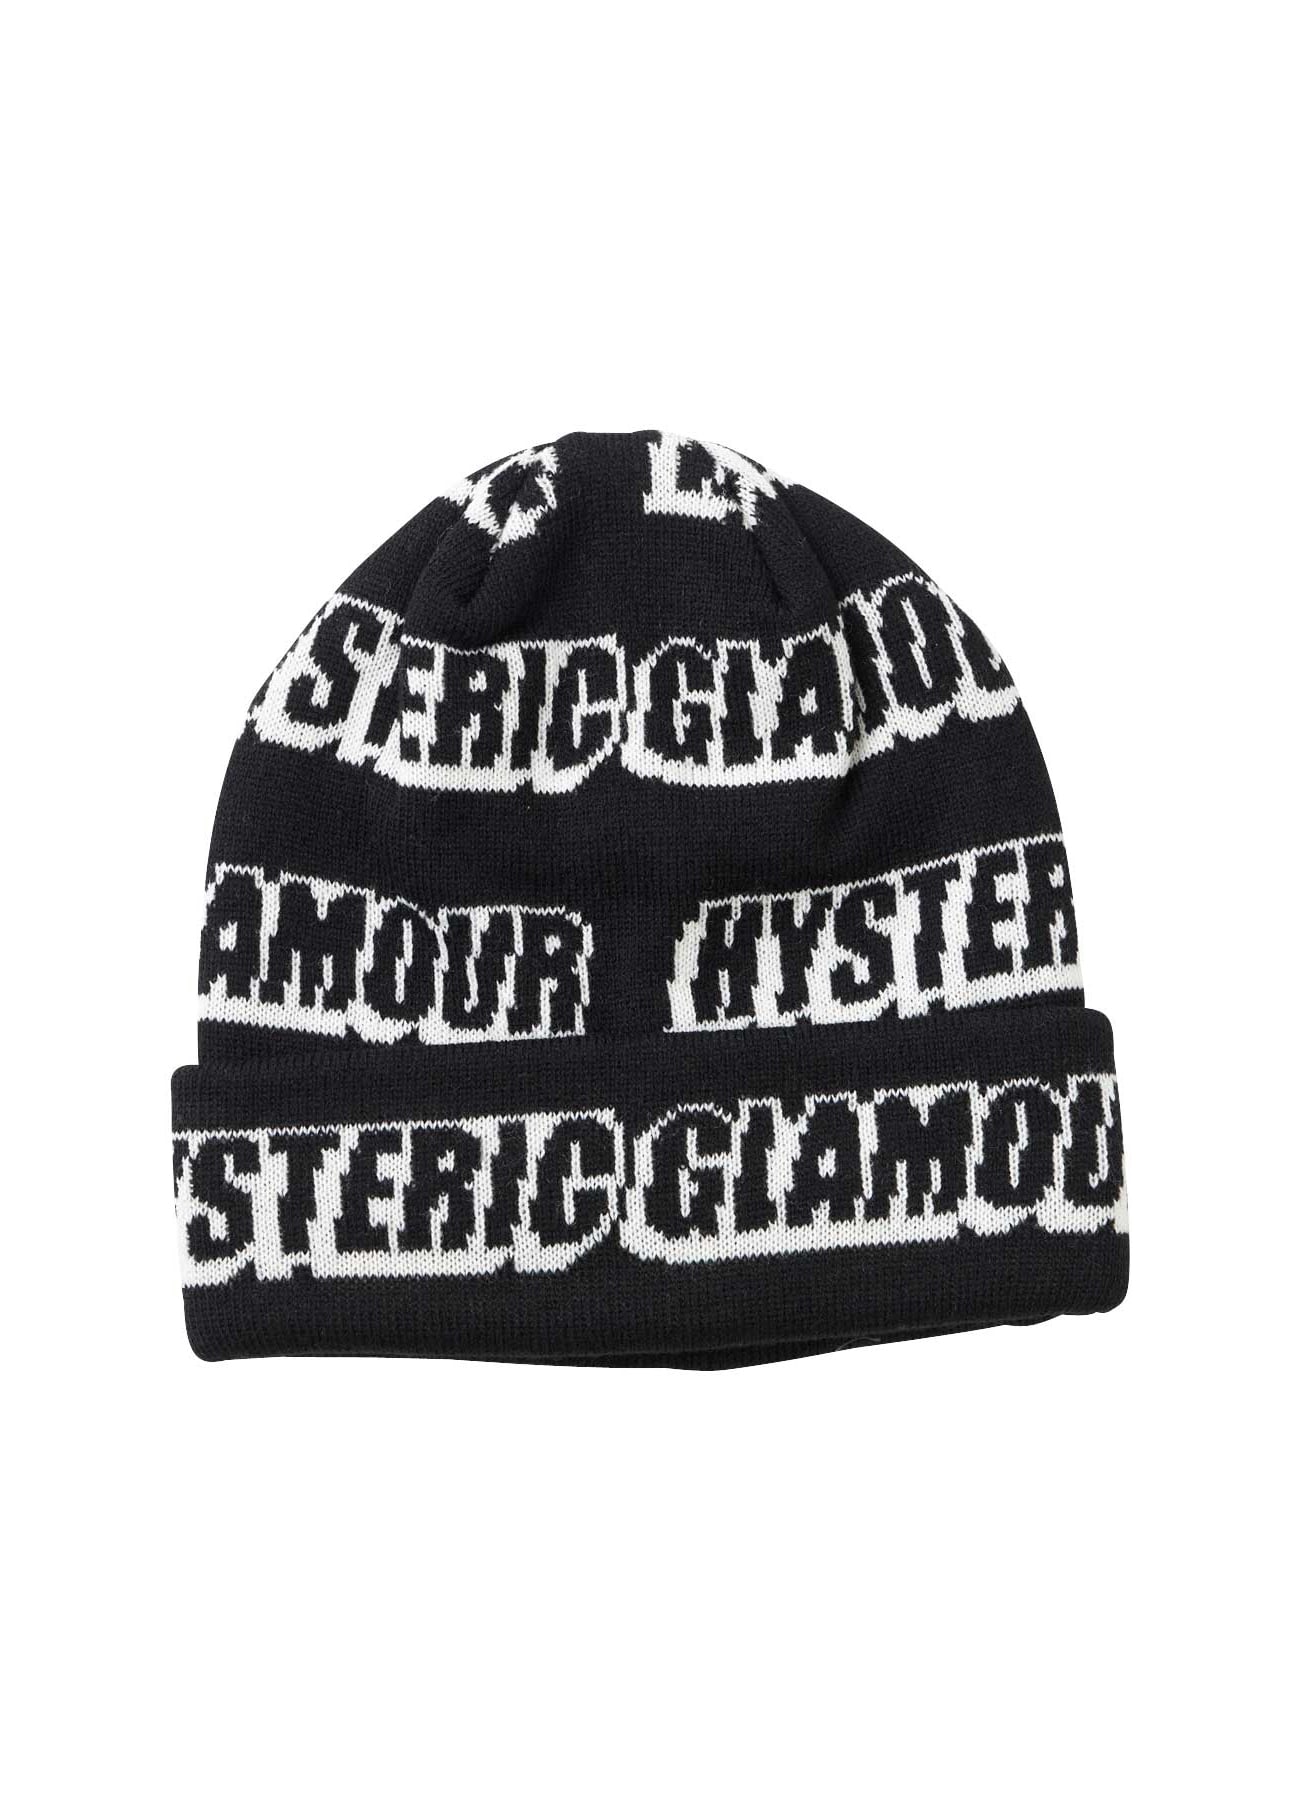 HYSTERIC POST Knit Cap